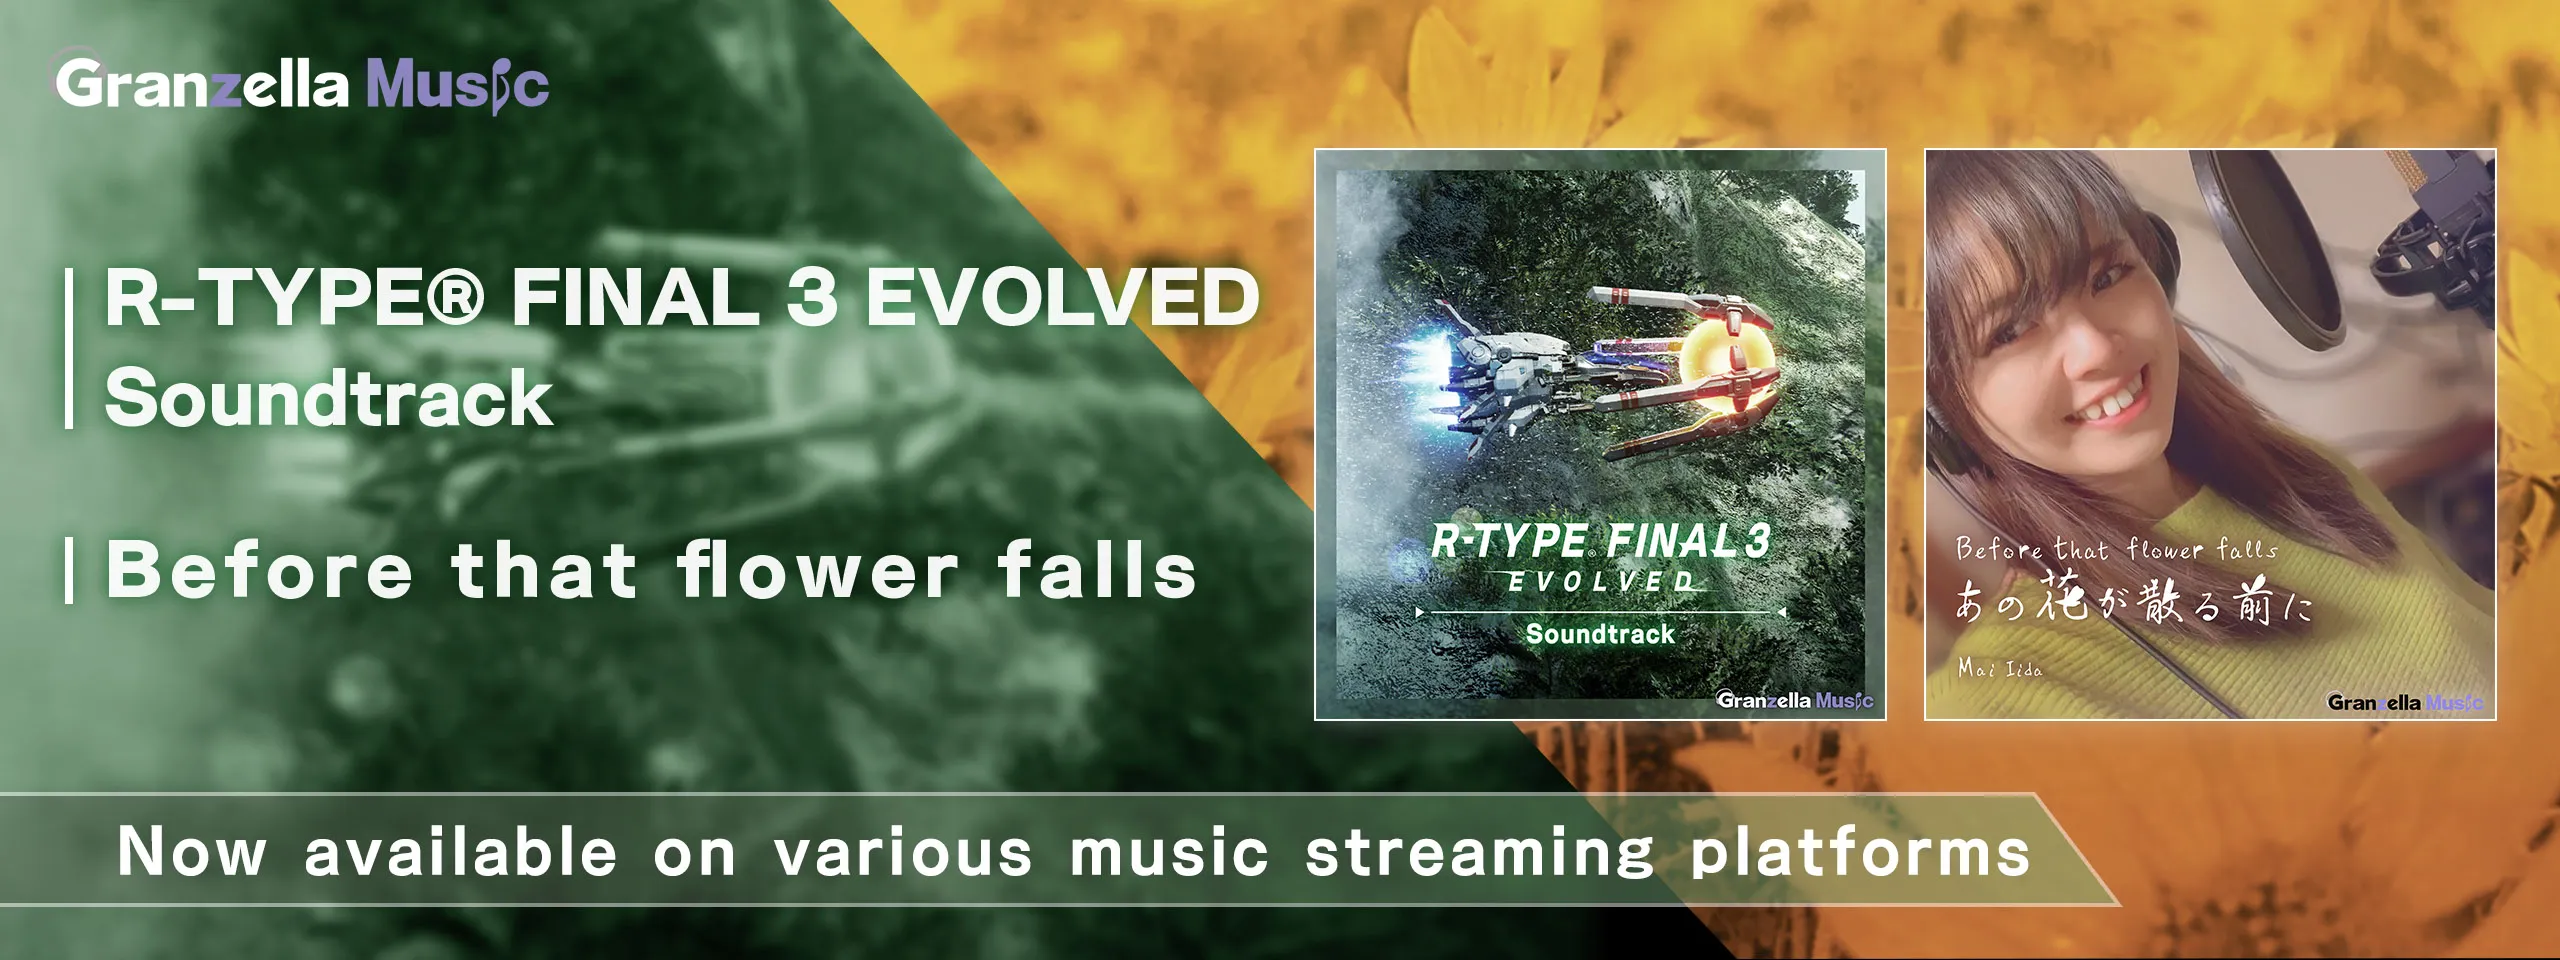 R-TYPE FINAL3 EVOLVED Soundtrack Before that flower falls